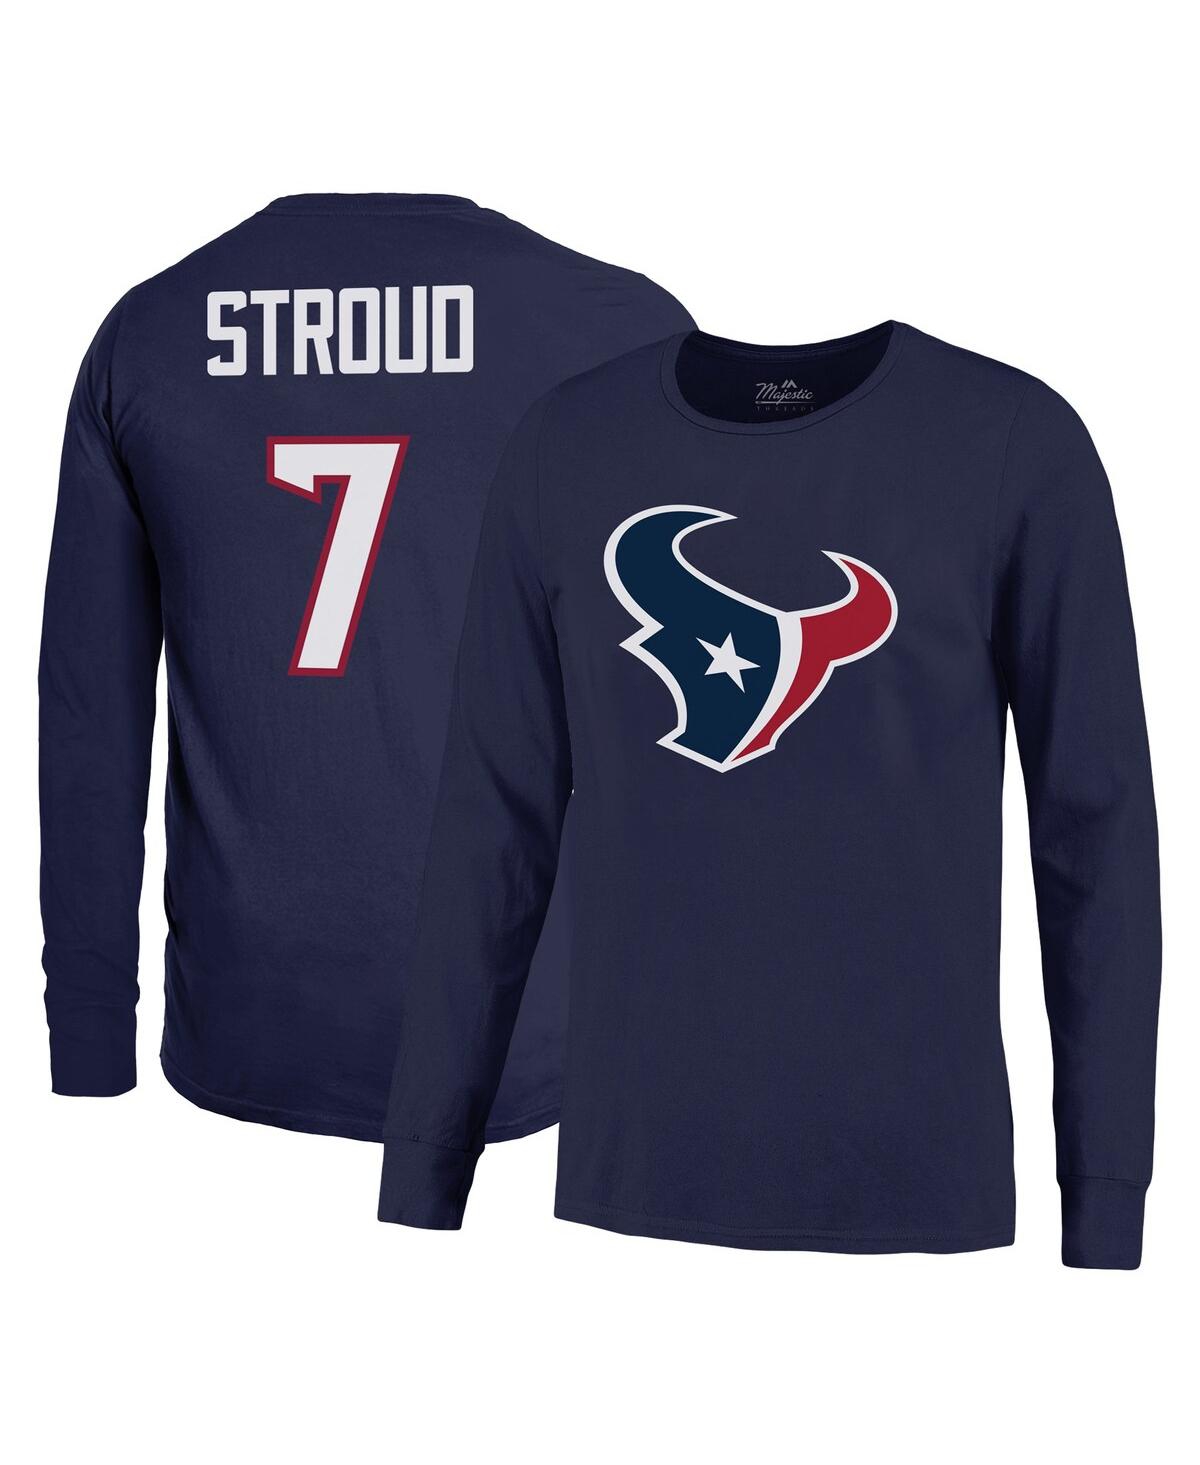 Men's Majestic Threads C.j. Stroud Navy Houston Texans Name and Number Long Sleeve T-shirt - Navy